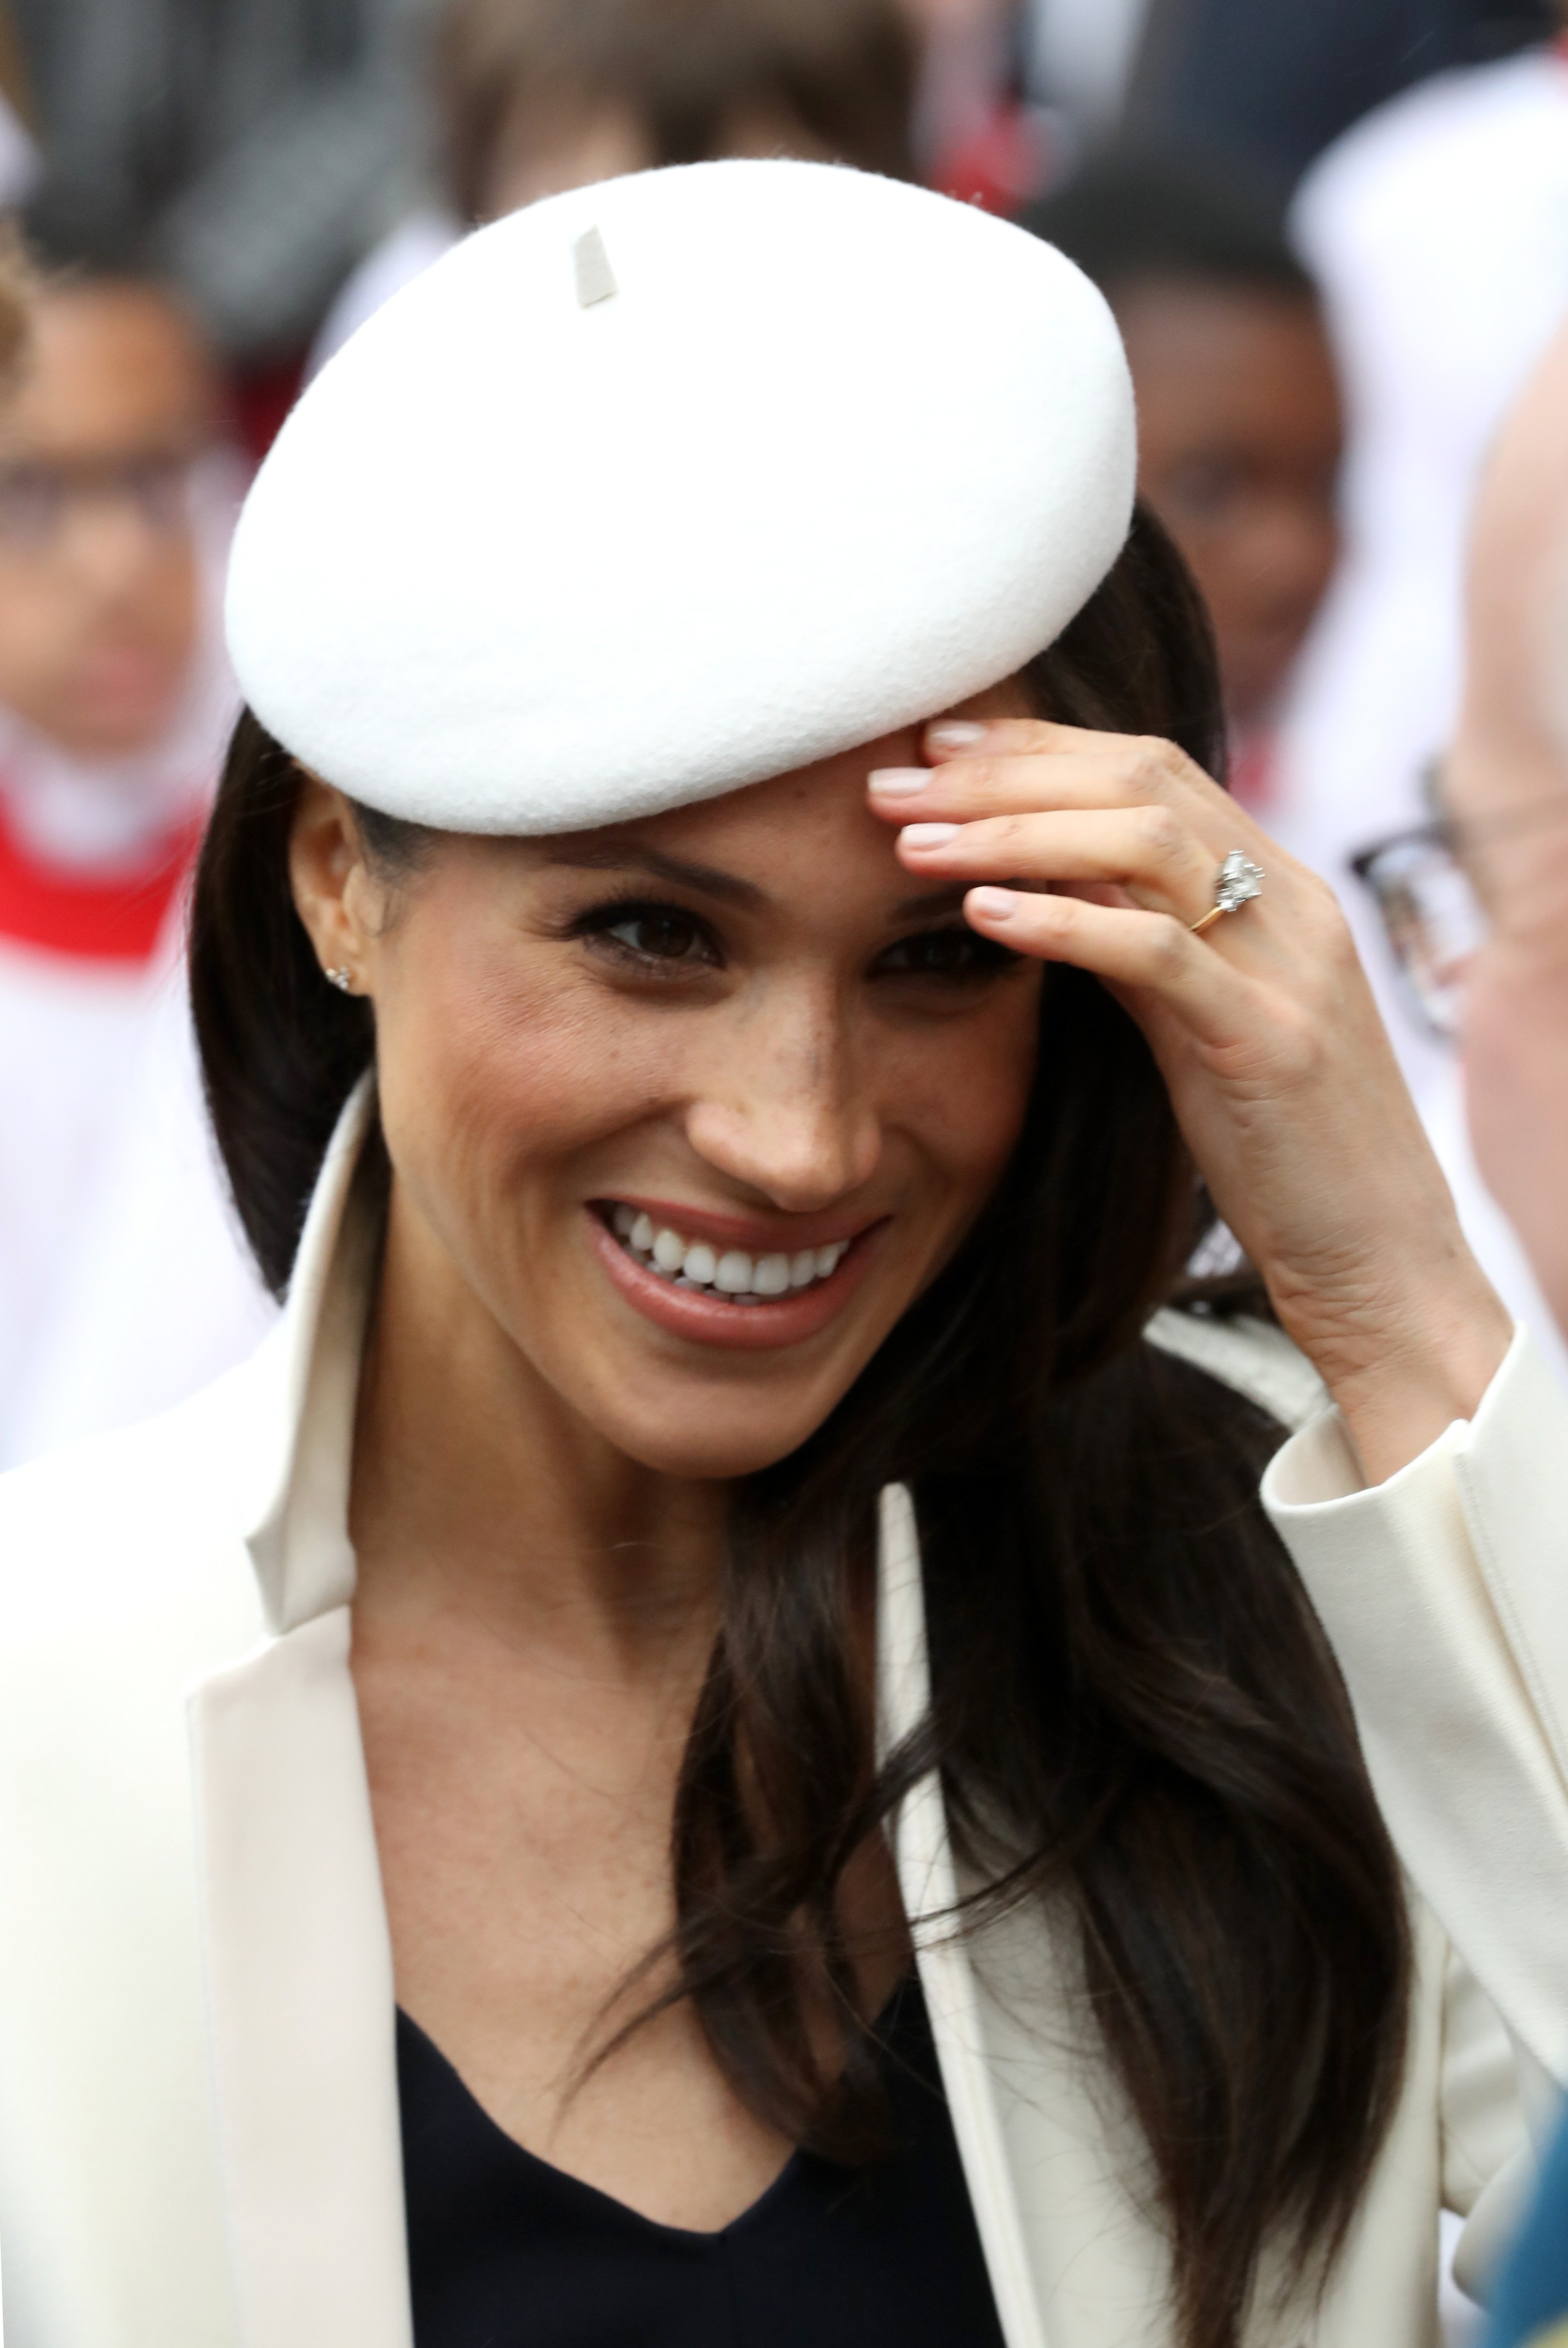 Meghan Markle attends the common wealth day service at Westminster Abbey in 2018. | Source: Getty Images